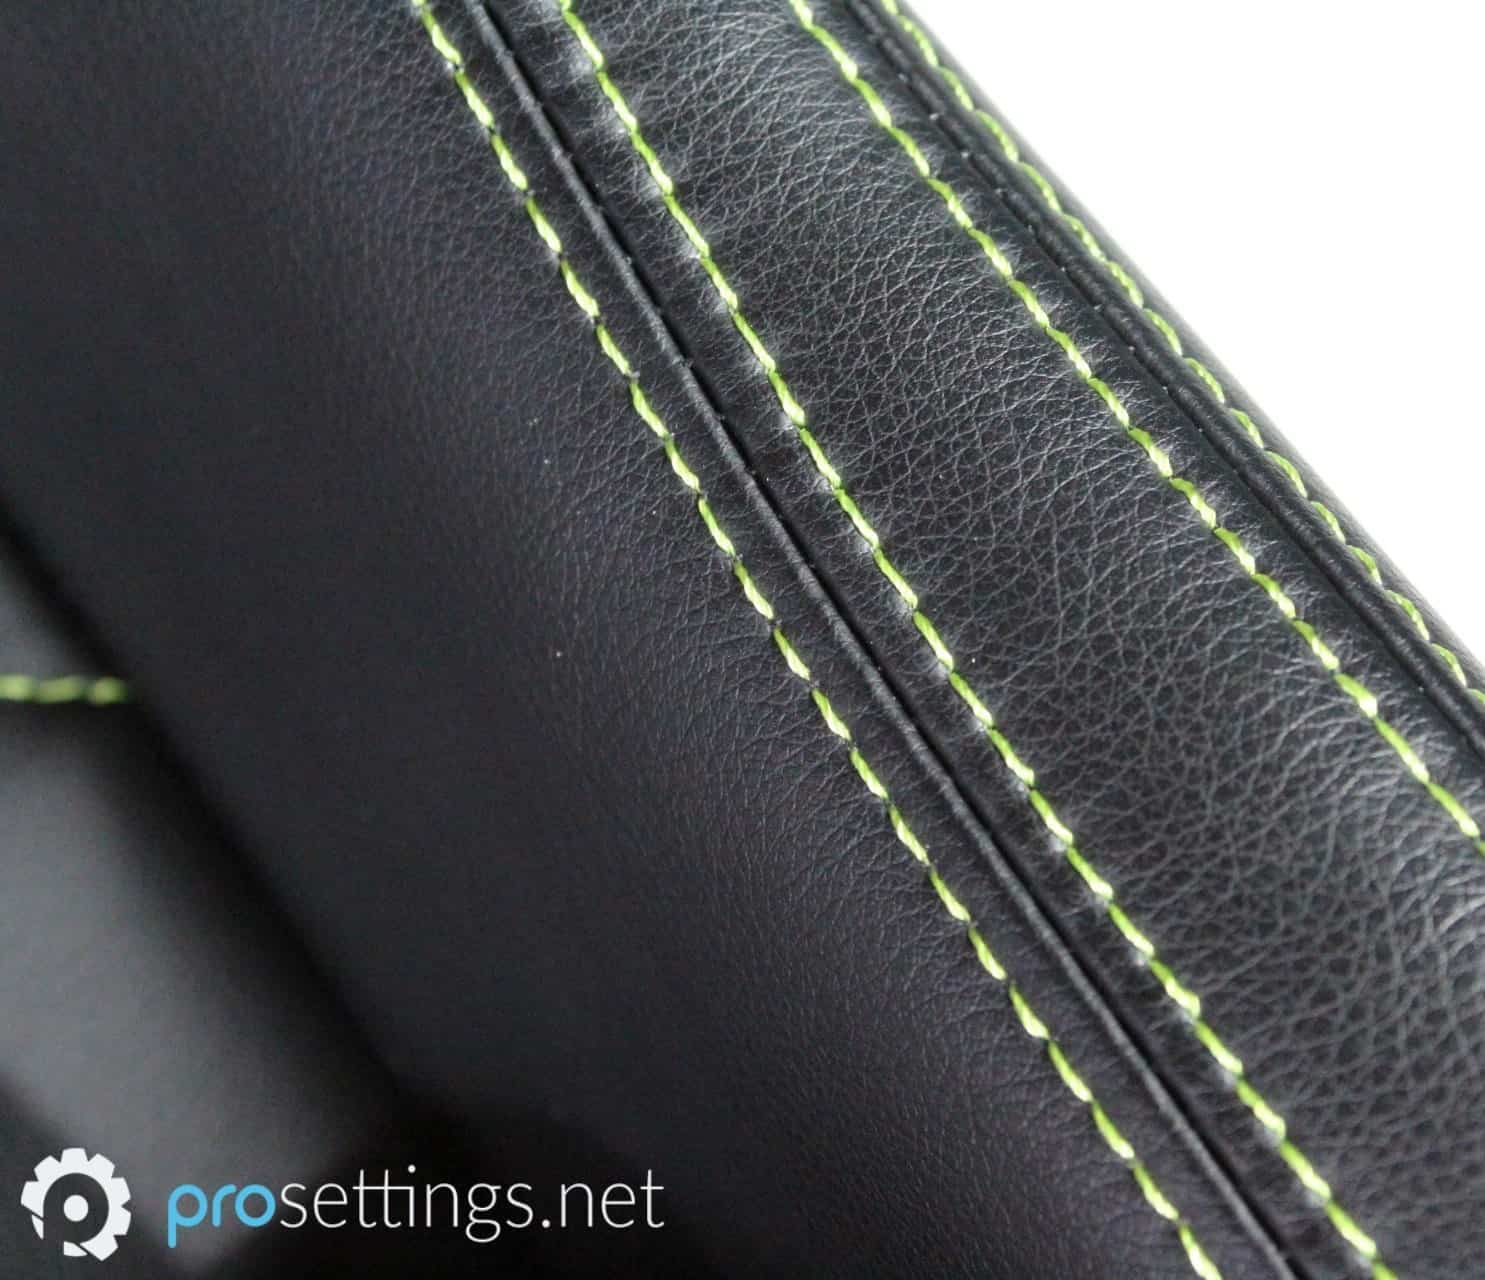 Speedseats Comfort Review Chair Stitching